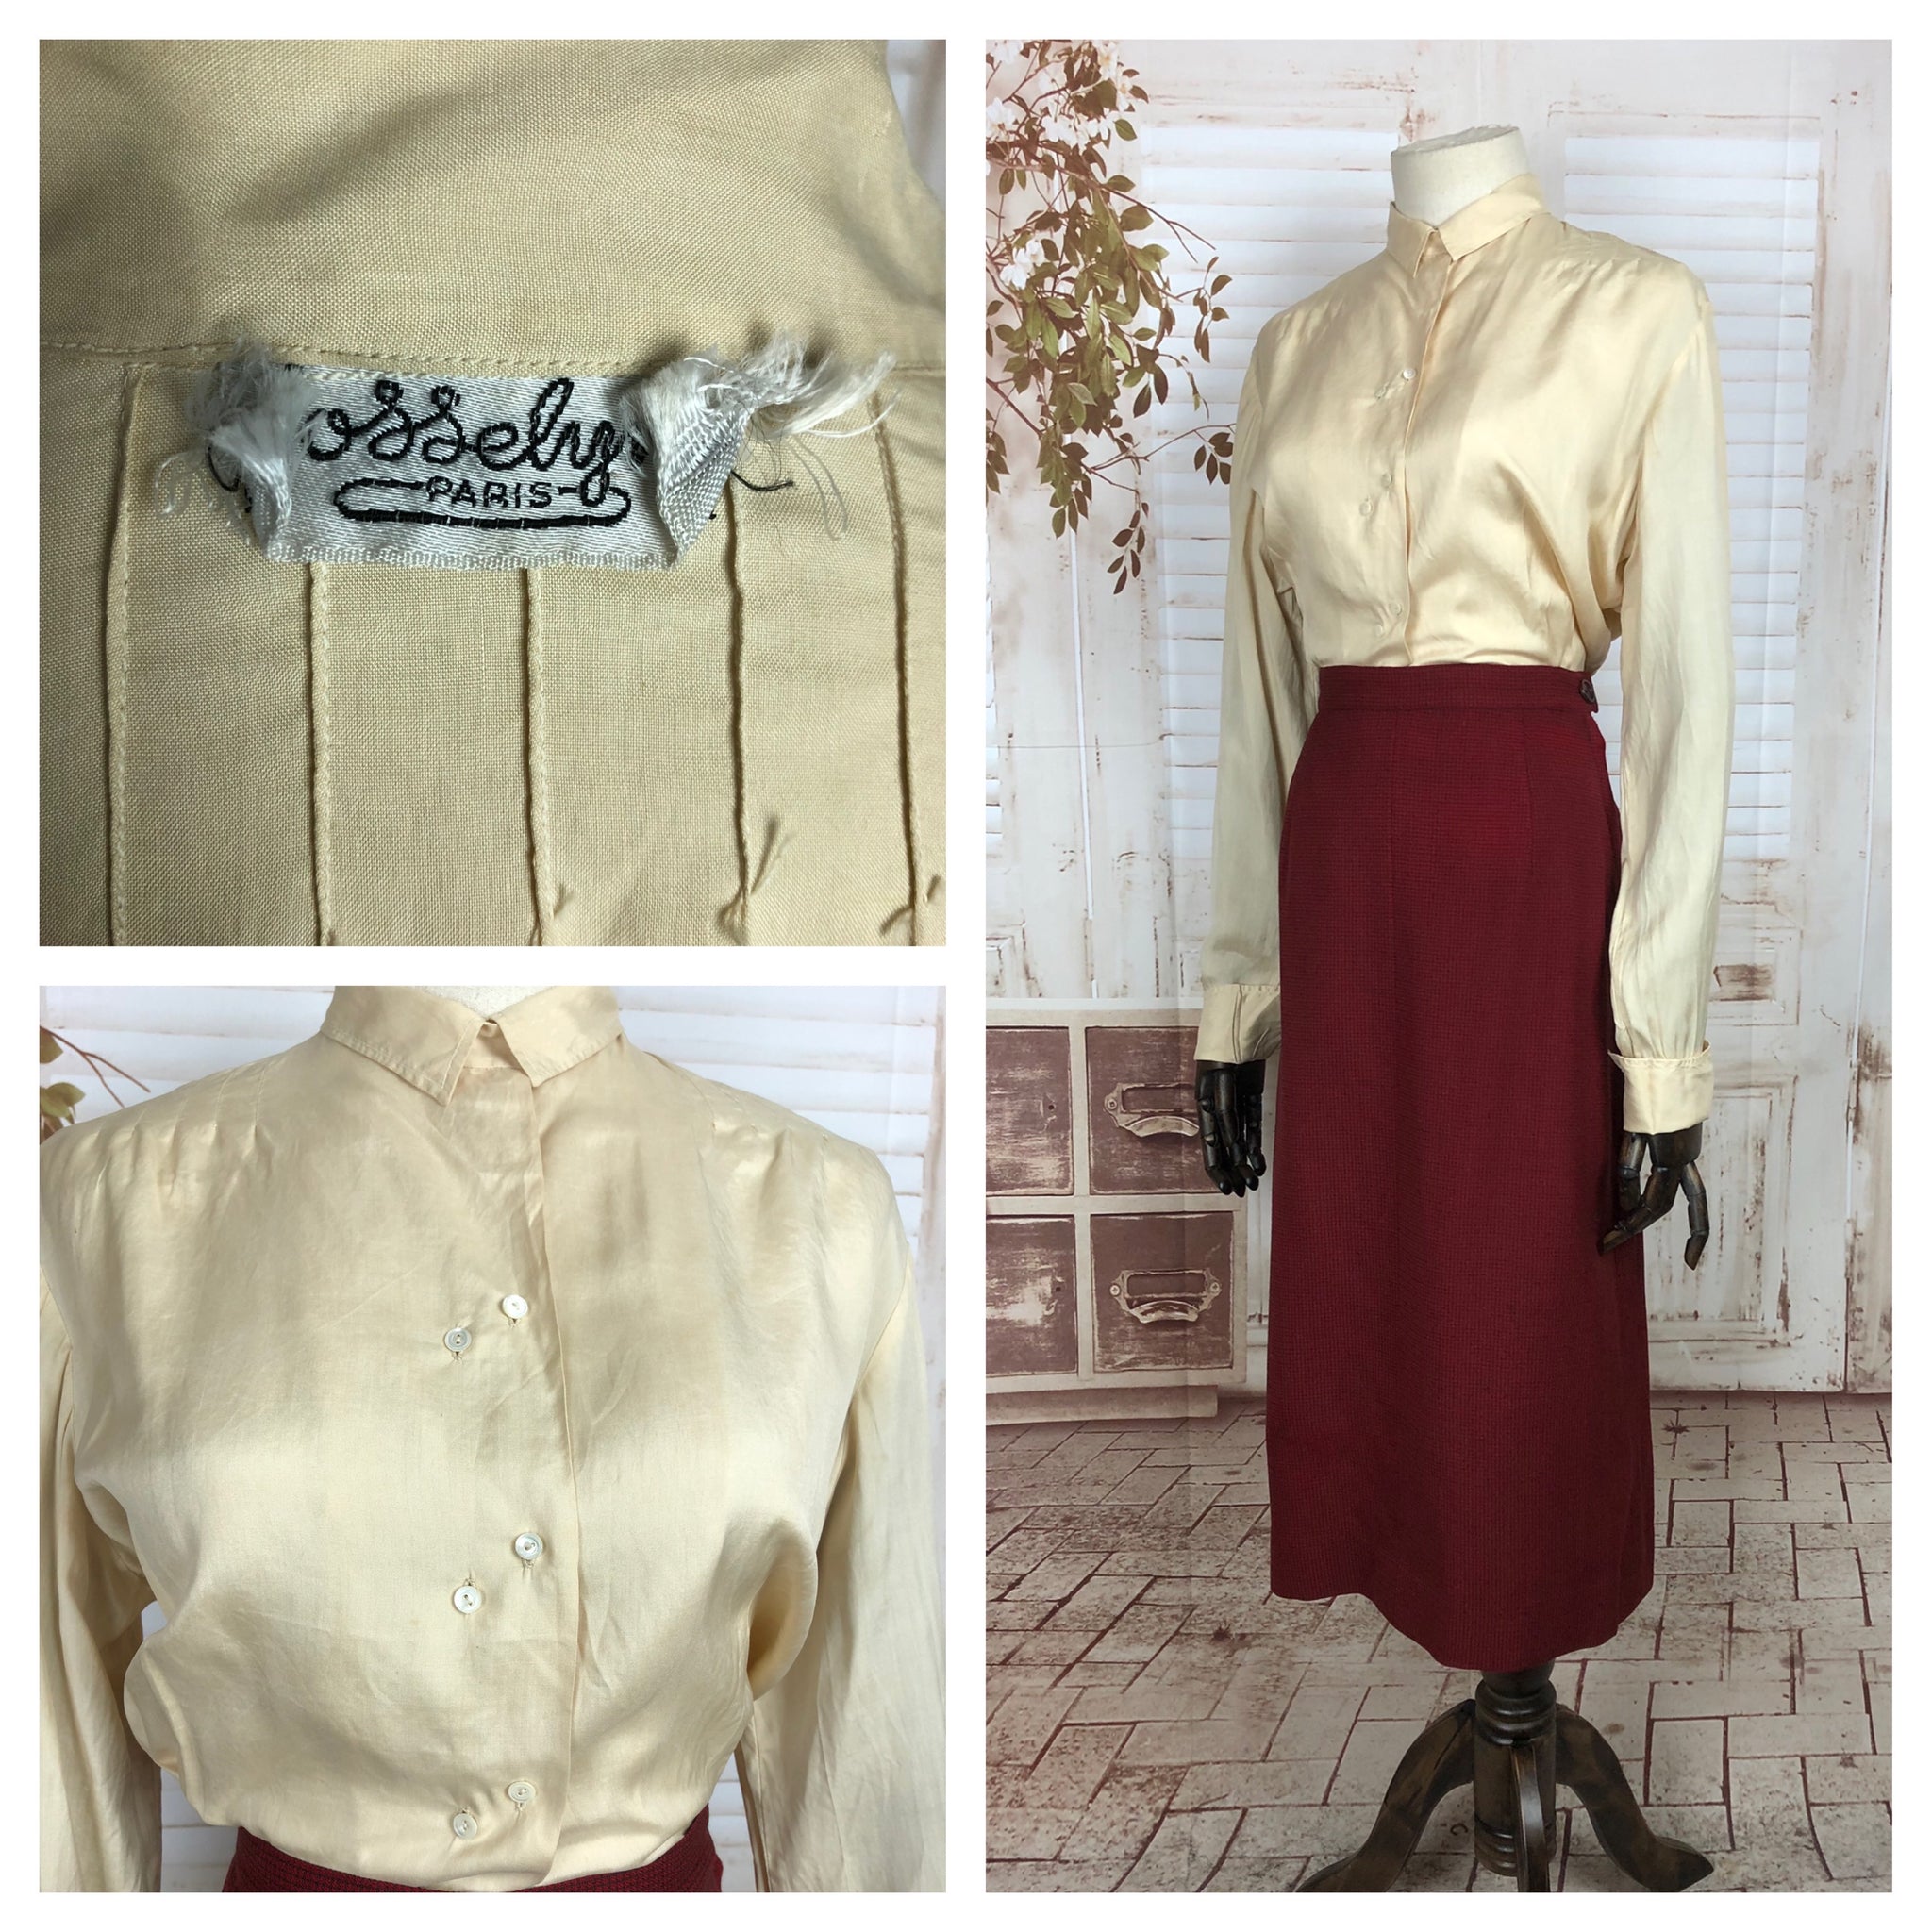 Original 1940s 40s Vintage Cream Silk Blouse With Offset Double Buttons